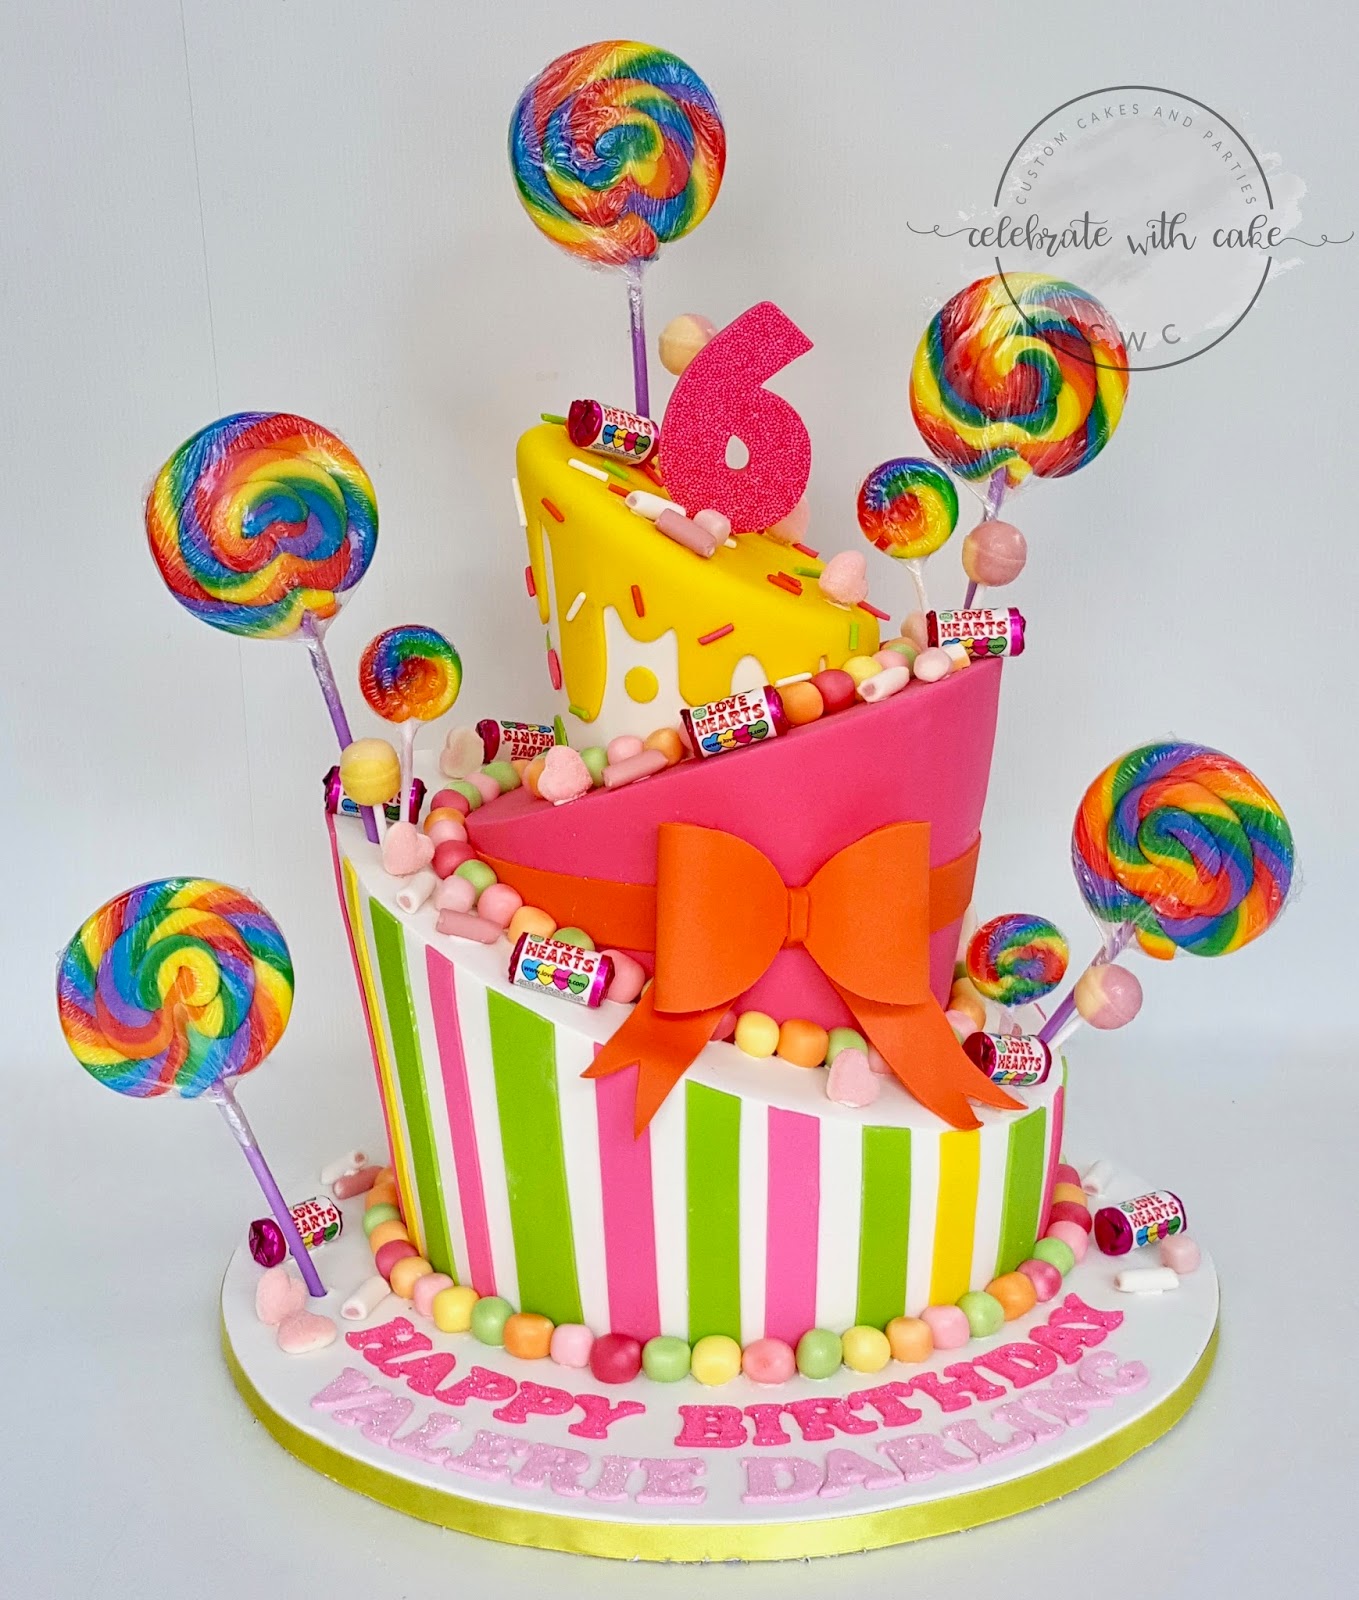 Celebrate with Cake!: Candy themed 3 tiers Cake